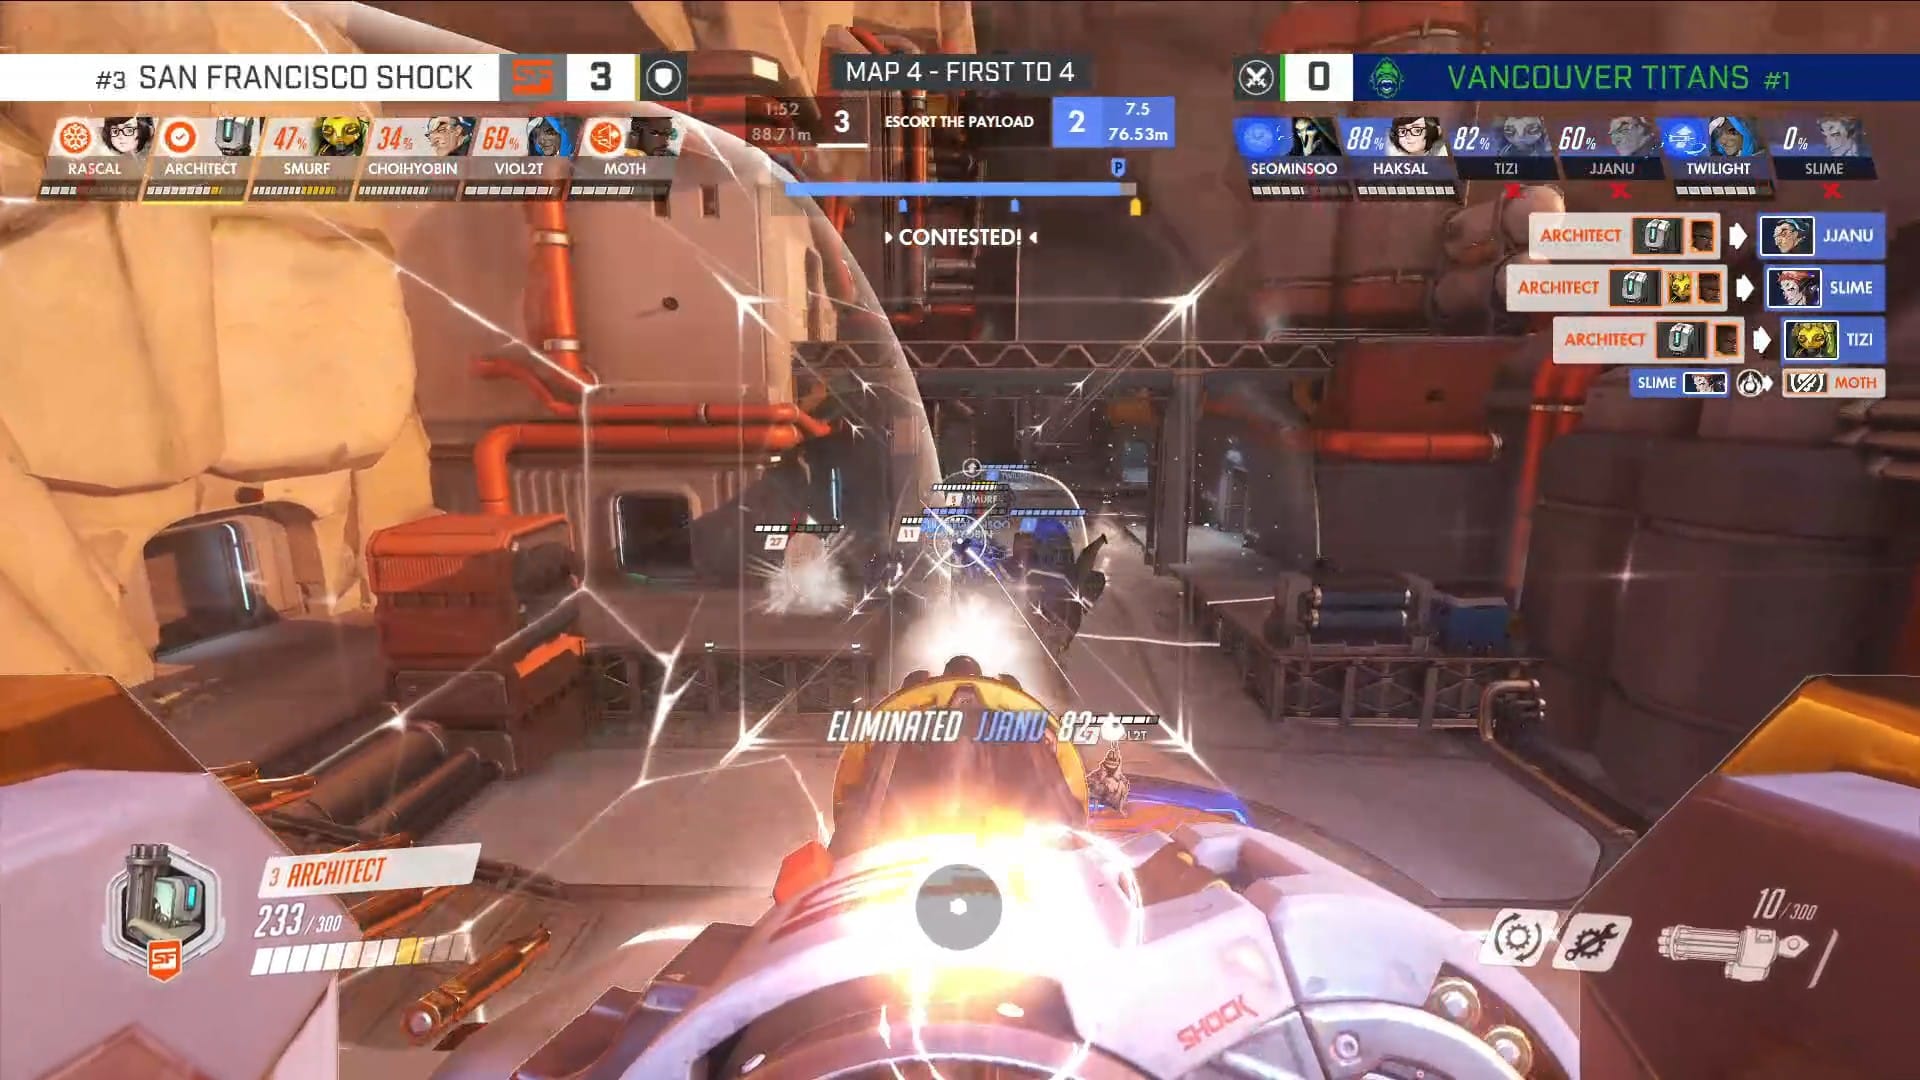 Architect of the San Francisco Shock playing Bastion and firing on the attacking Vancouver Titans